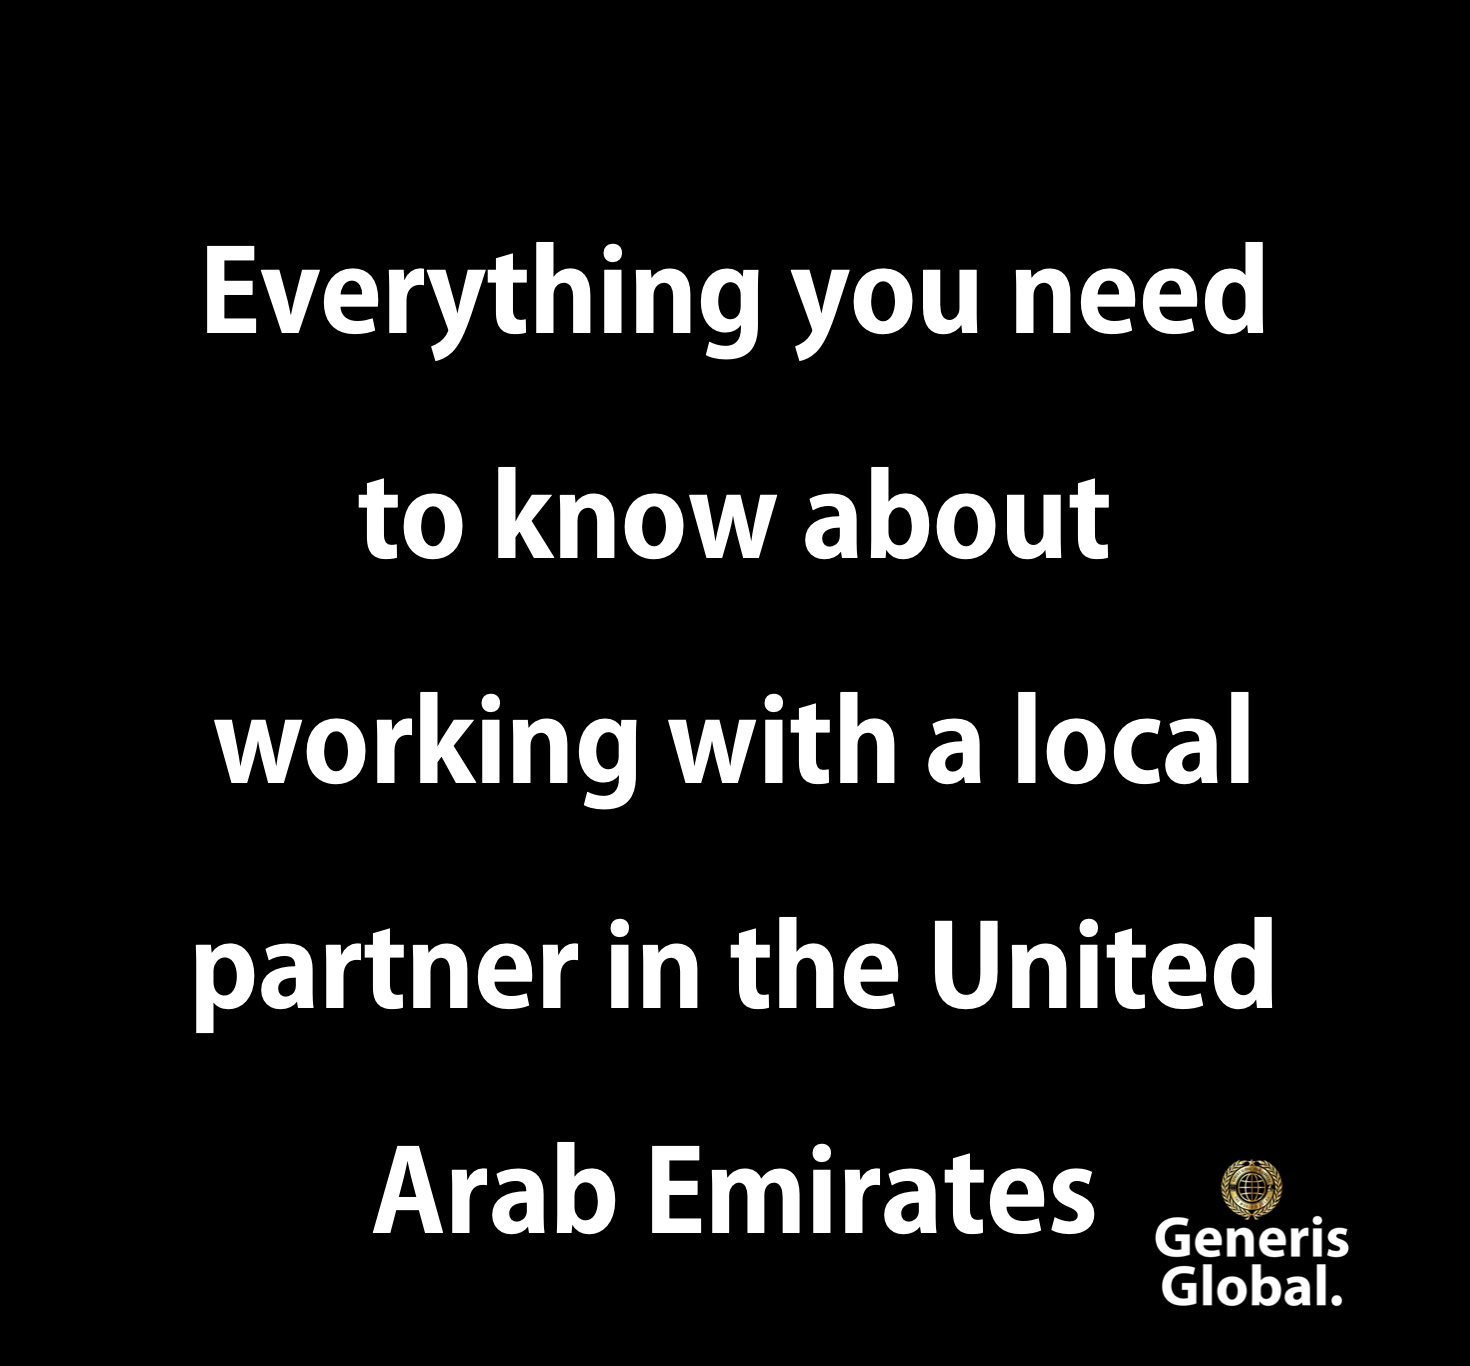 Everything you need to know about working with a local partner in the United Arab Emirates